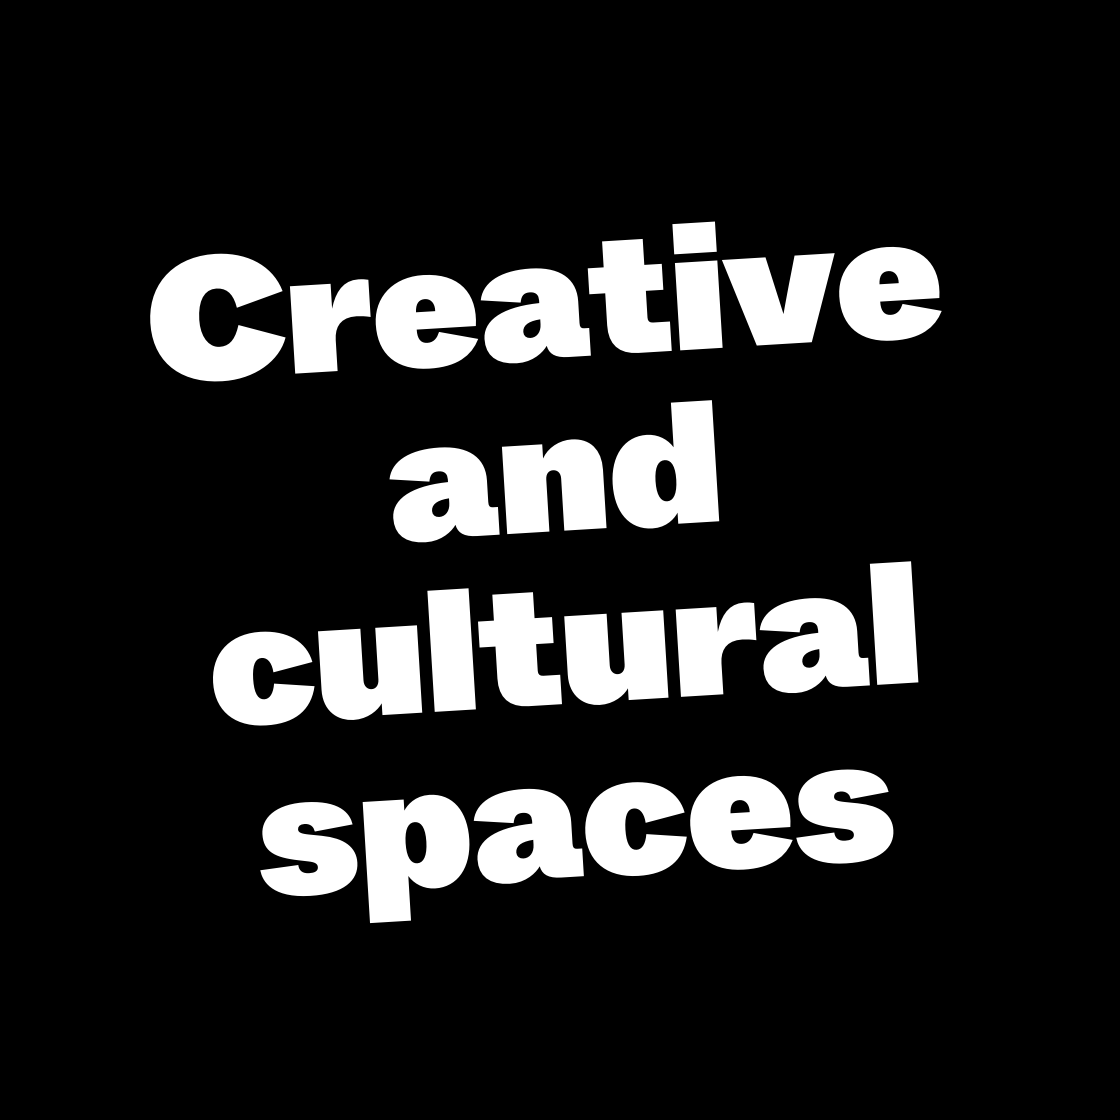 Creative and cultural spaces